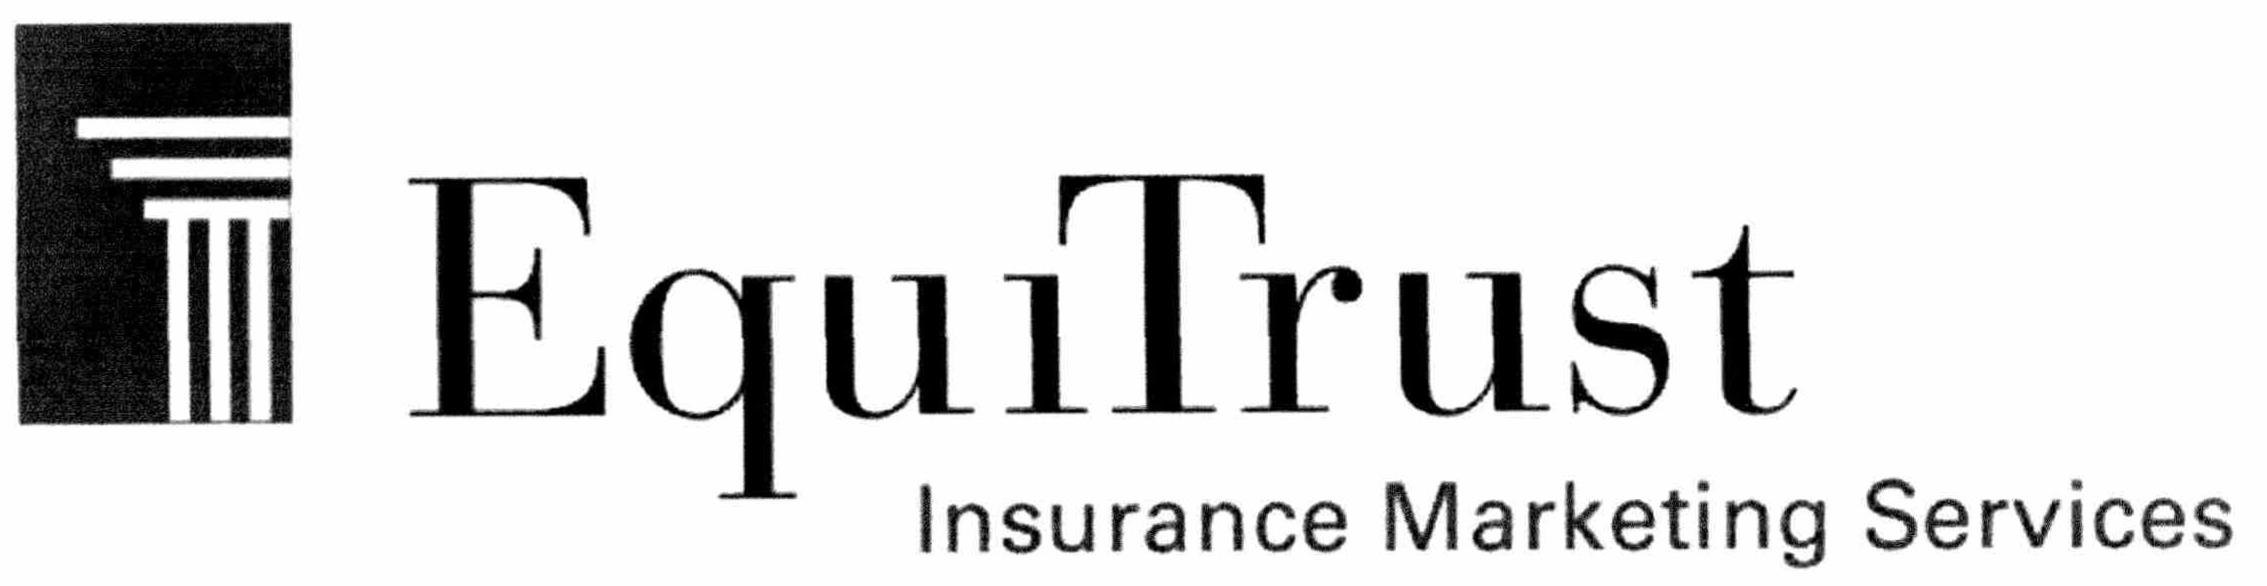  EQUITRUST INSURANCE MARKETING SERVICES